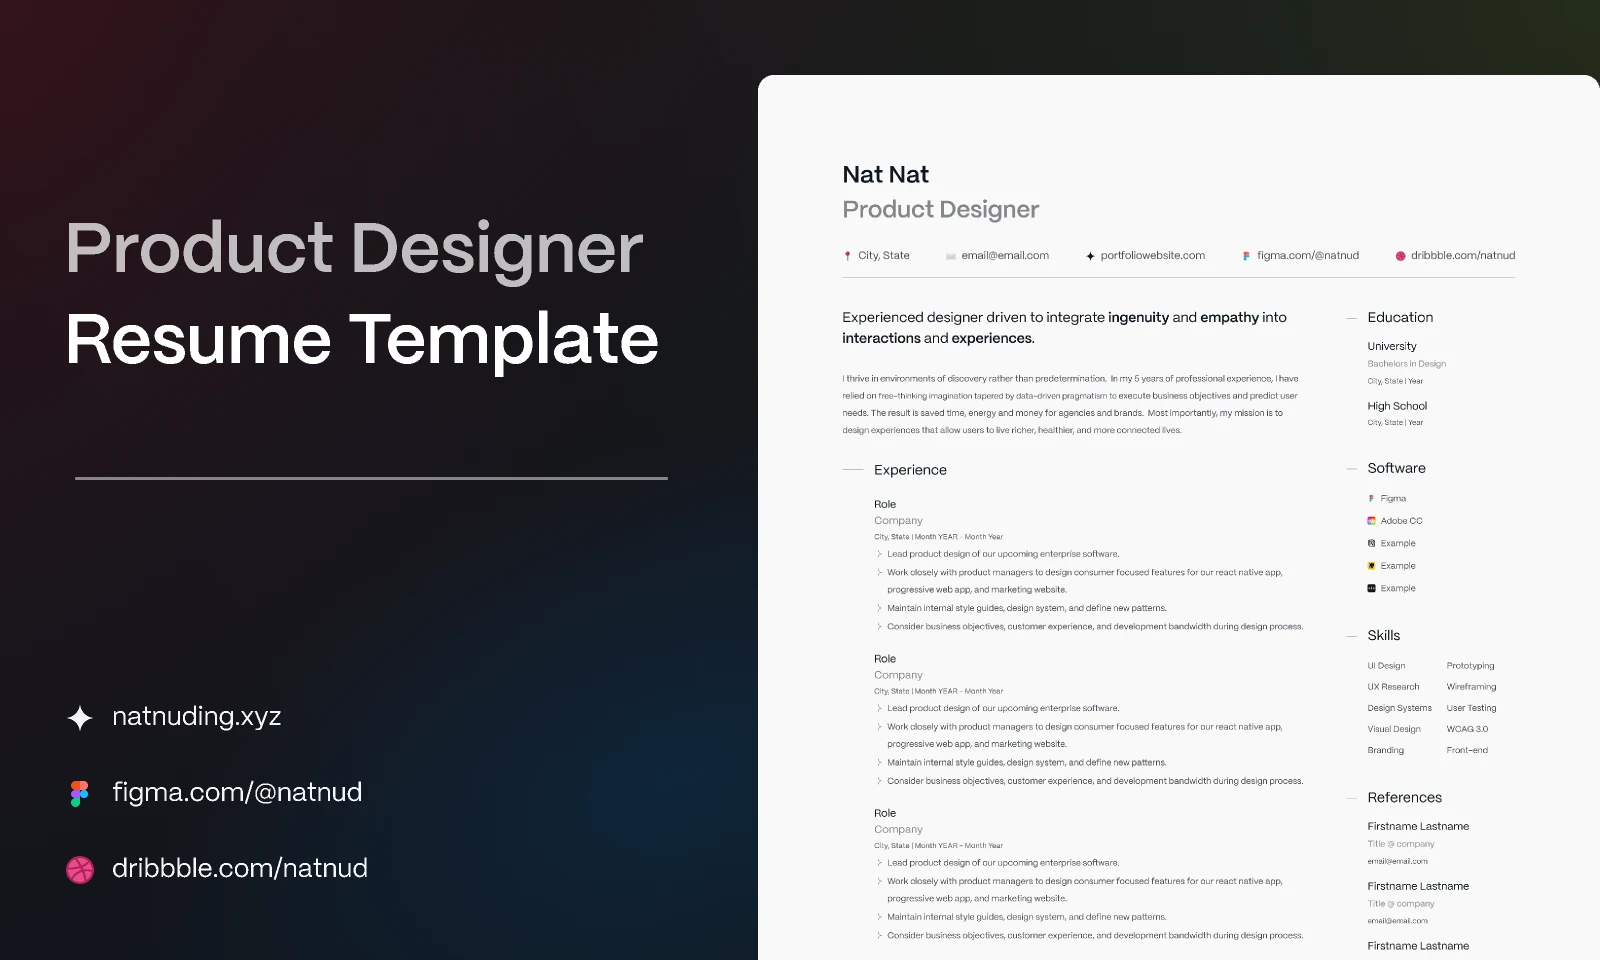 Product Designer Resume Template for Figma and Adobe XD